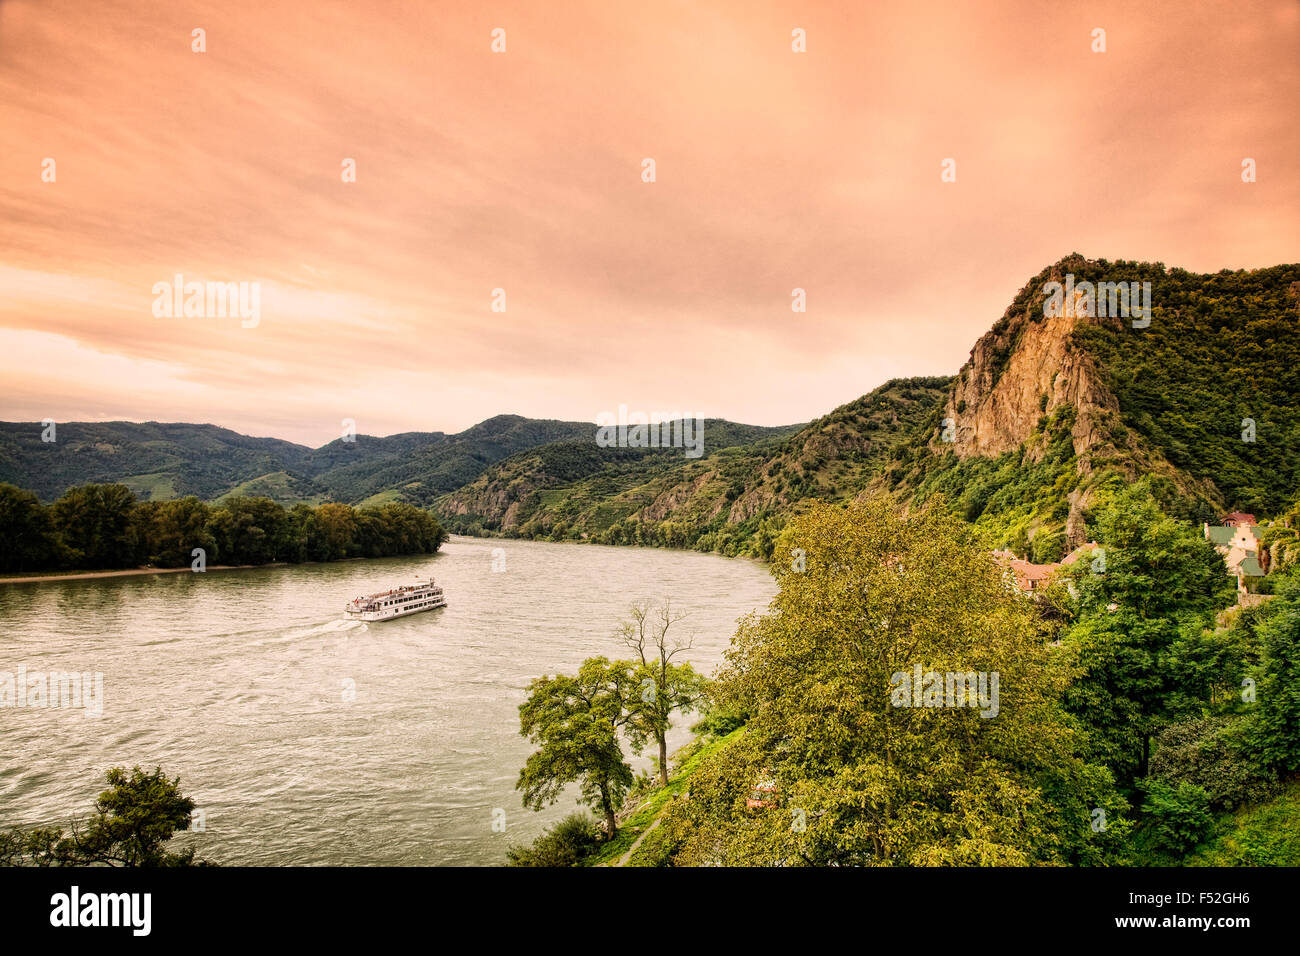 A cruise boat on the Danube River at Durnstein, Austria Stock Photo